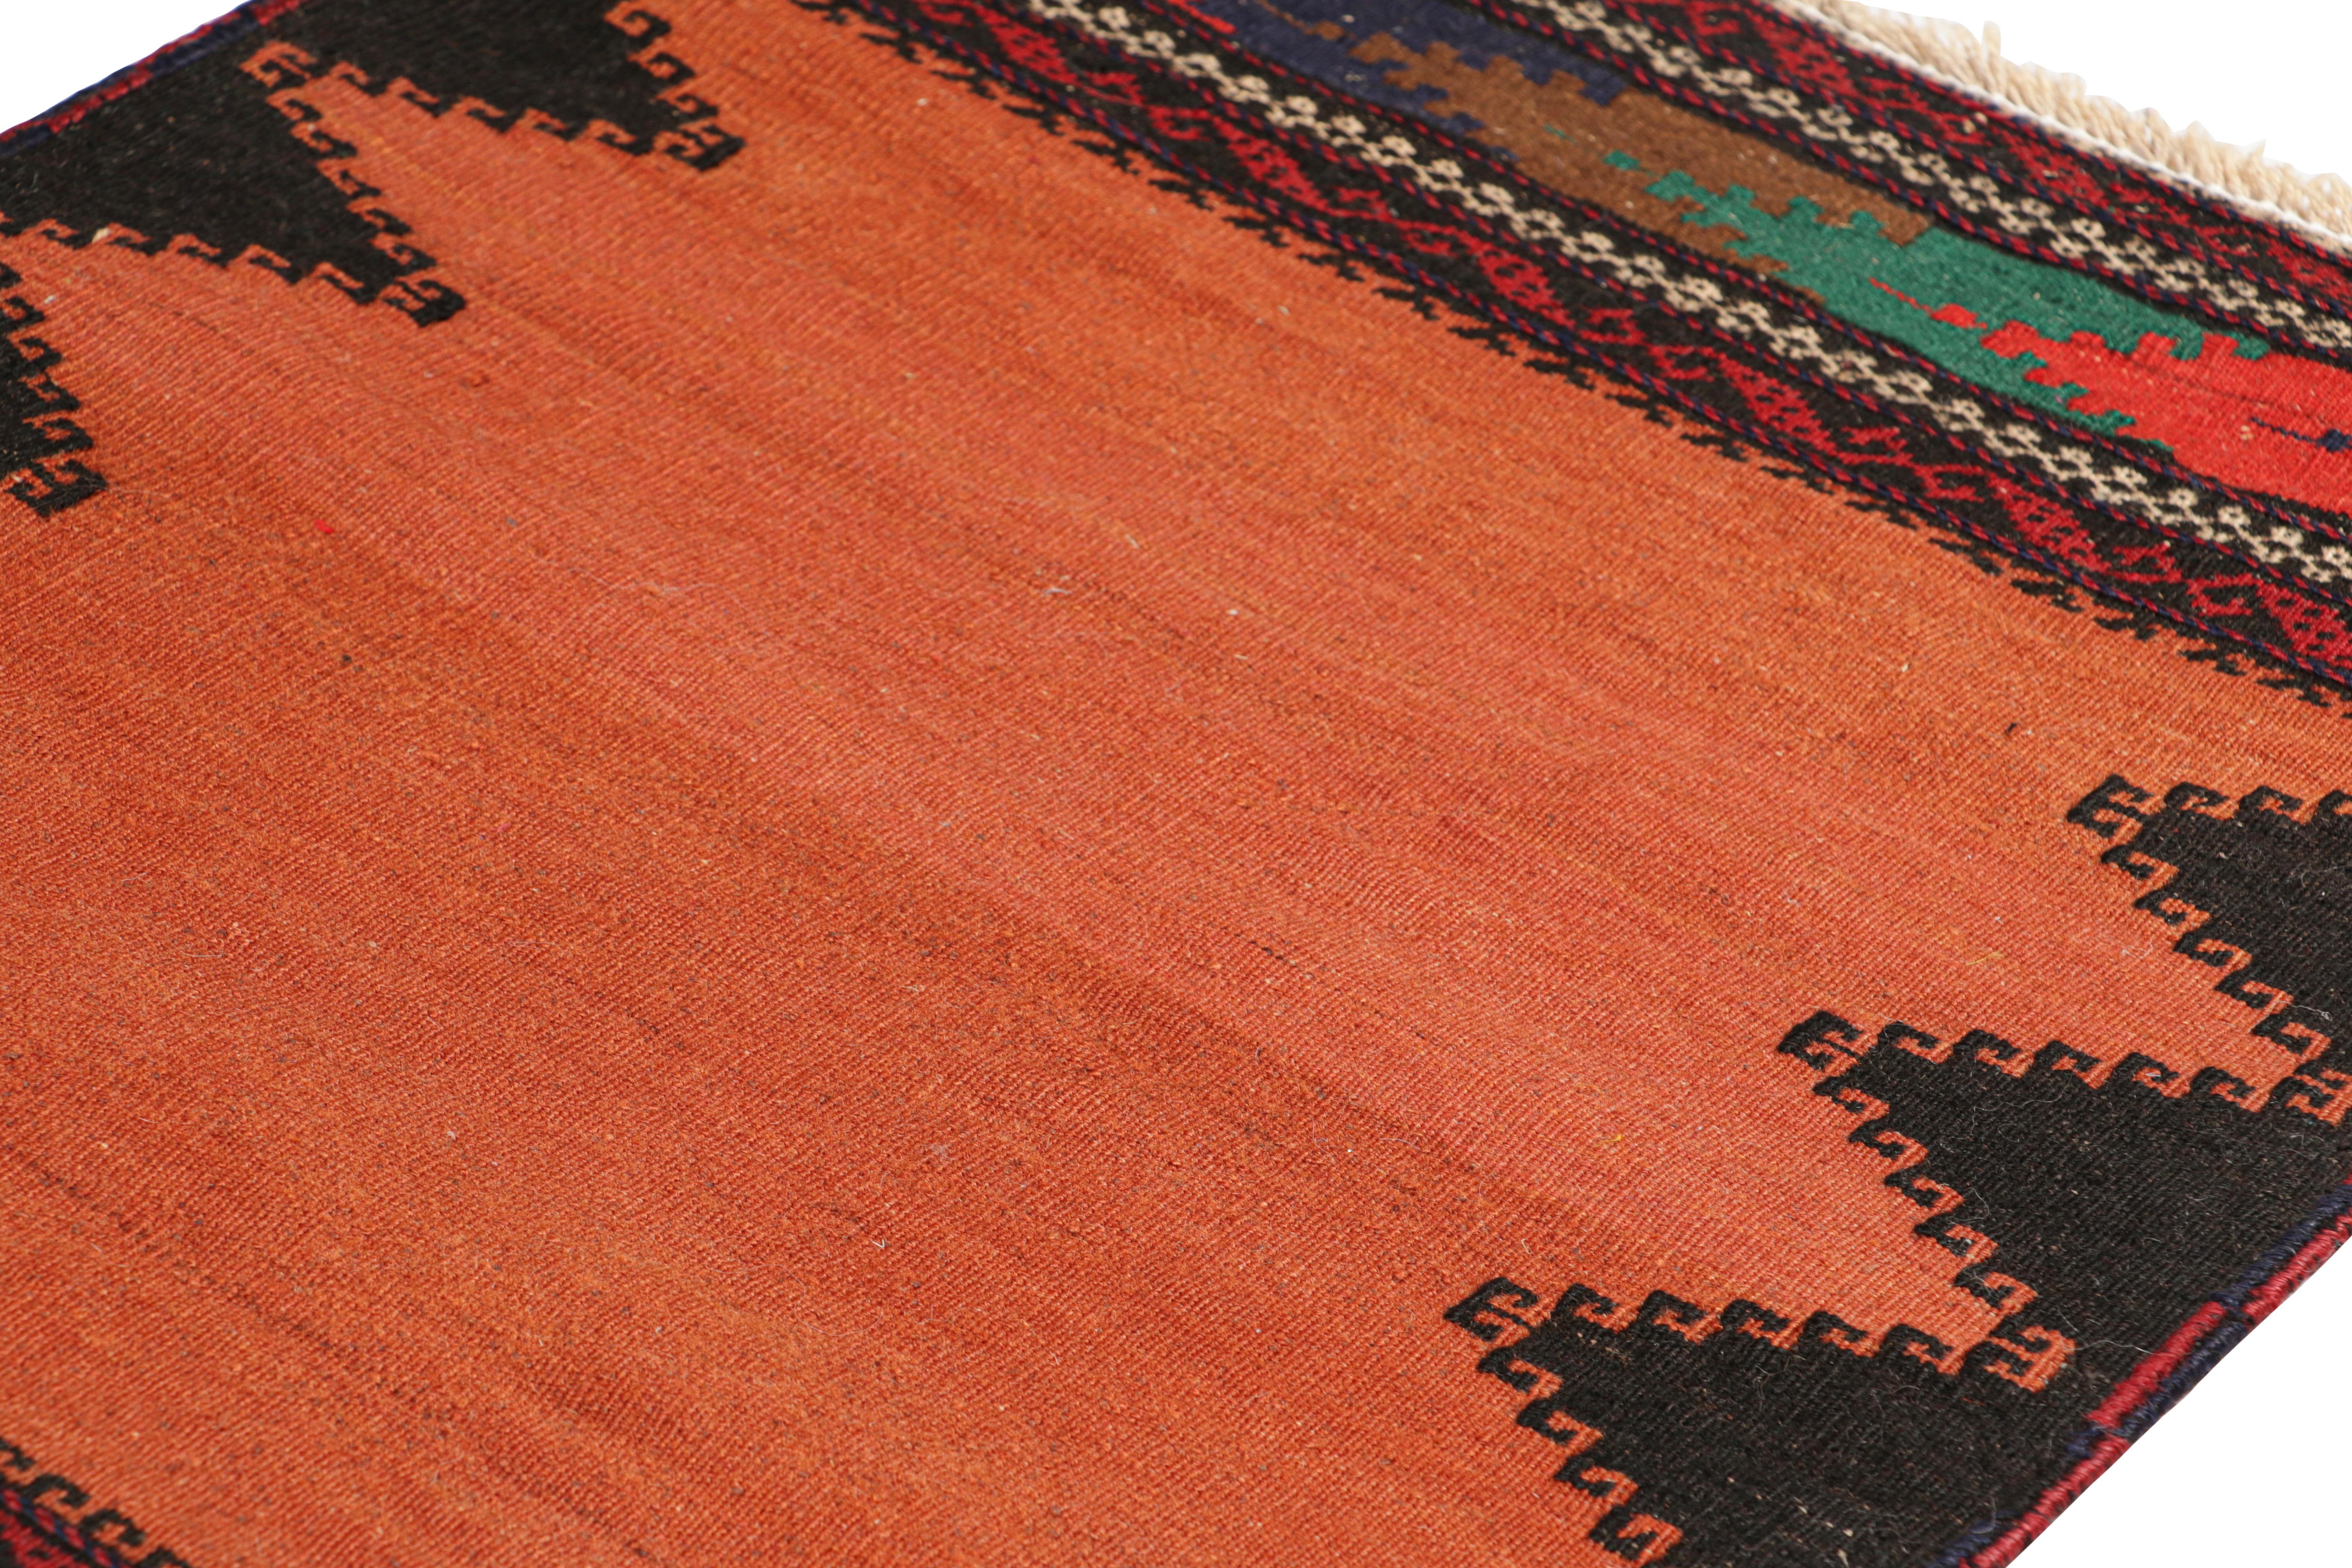 Hand-Woven Vintage Afghan Kilim in Rust, with Polychromatic Patterns, from Rug & Kilim For Sale